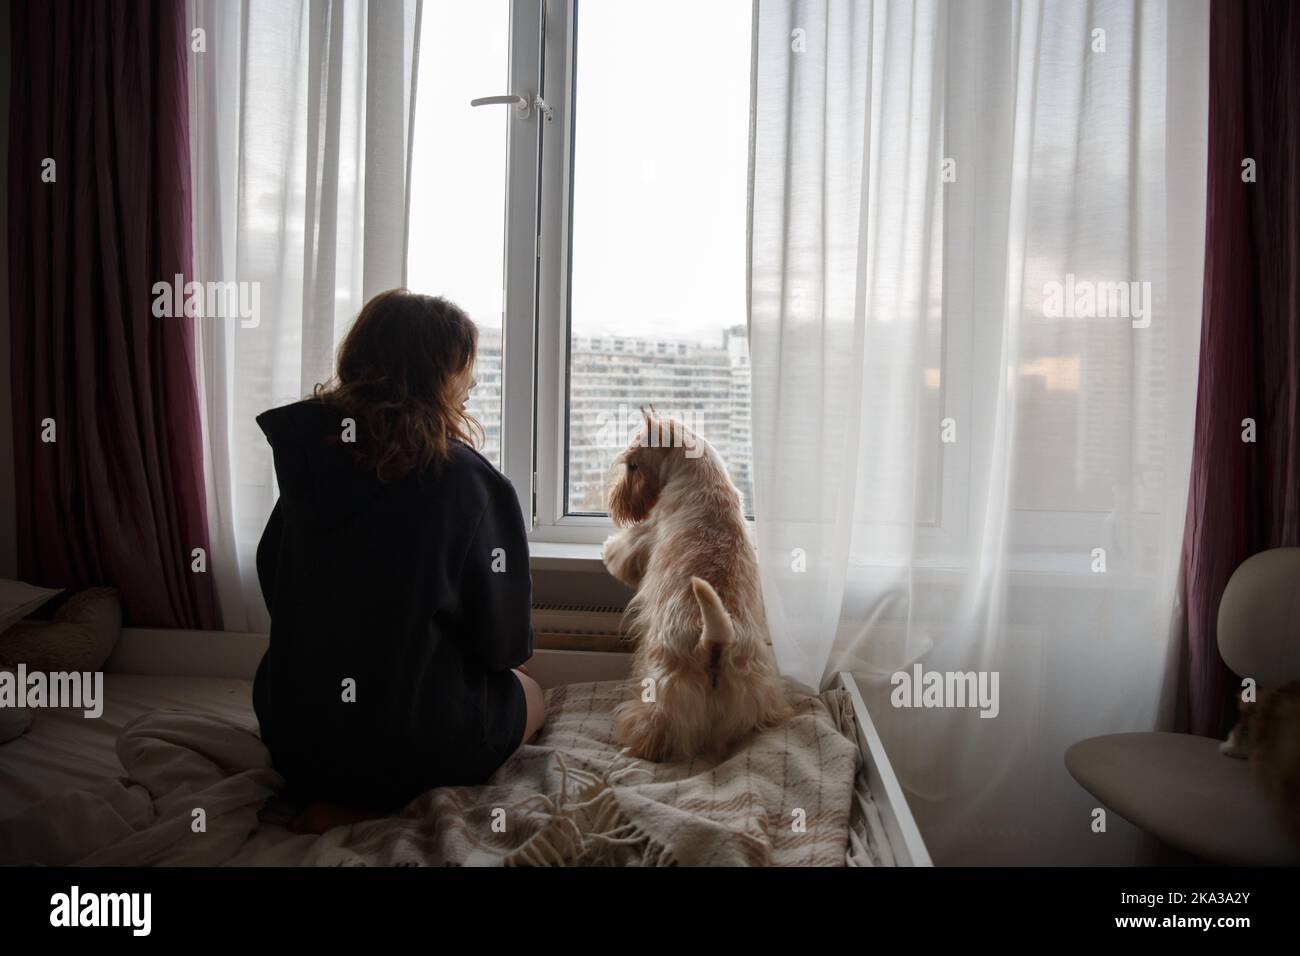 A girl and a dog on a large bed in the room look out the window Stock Photo